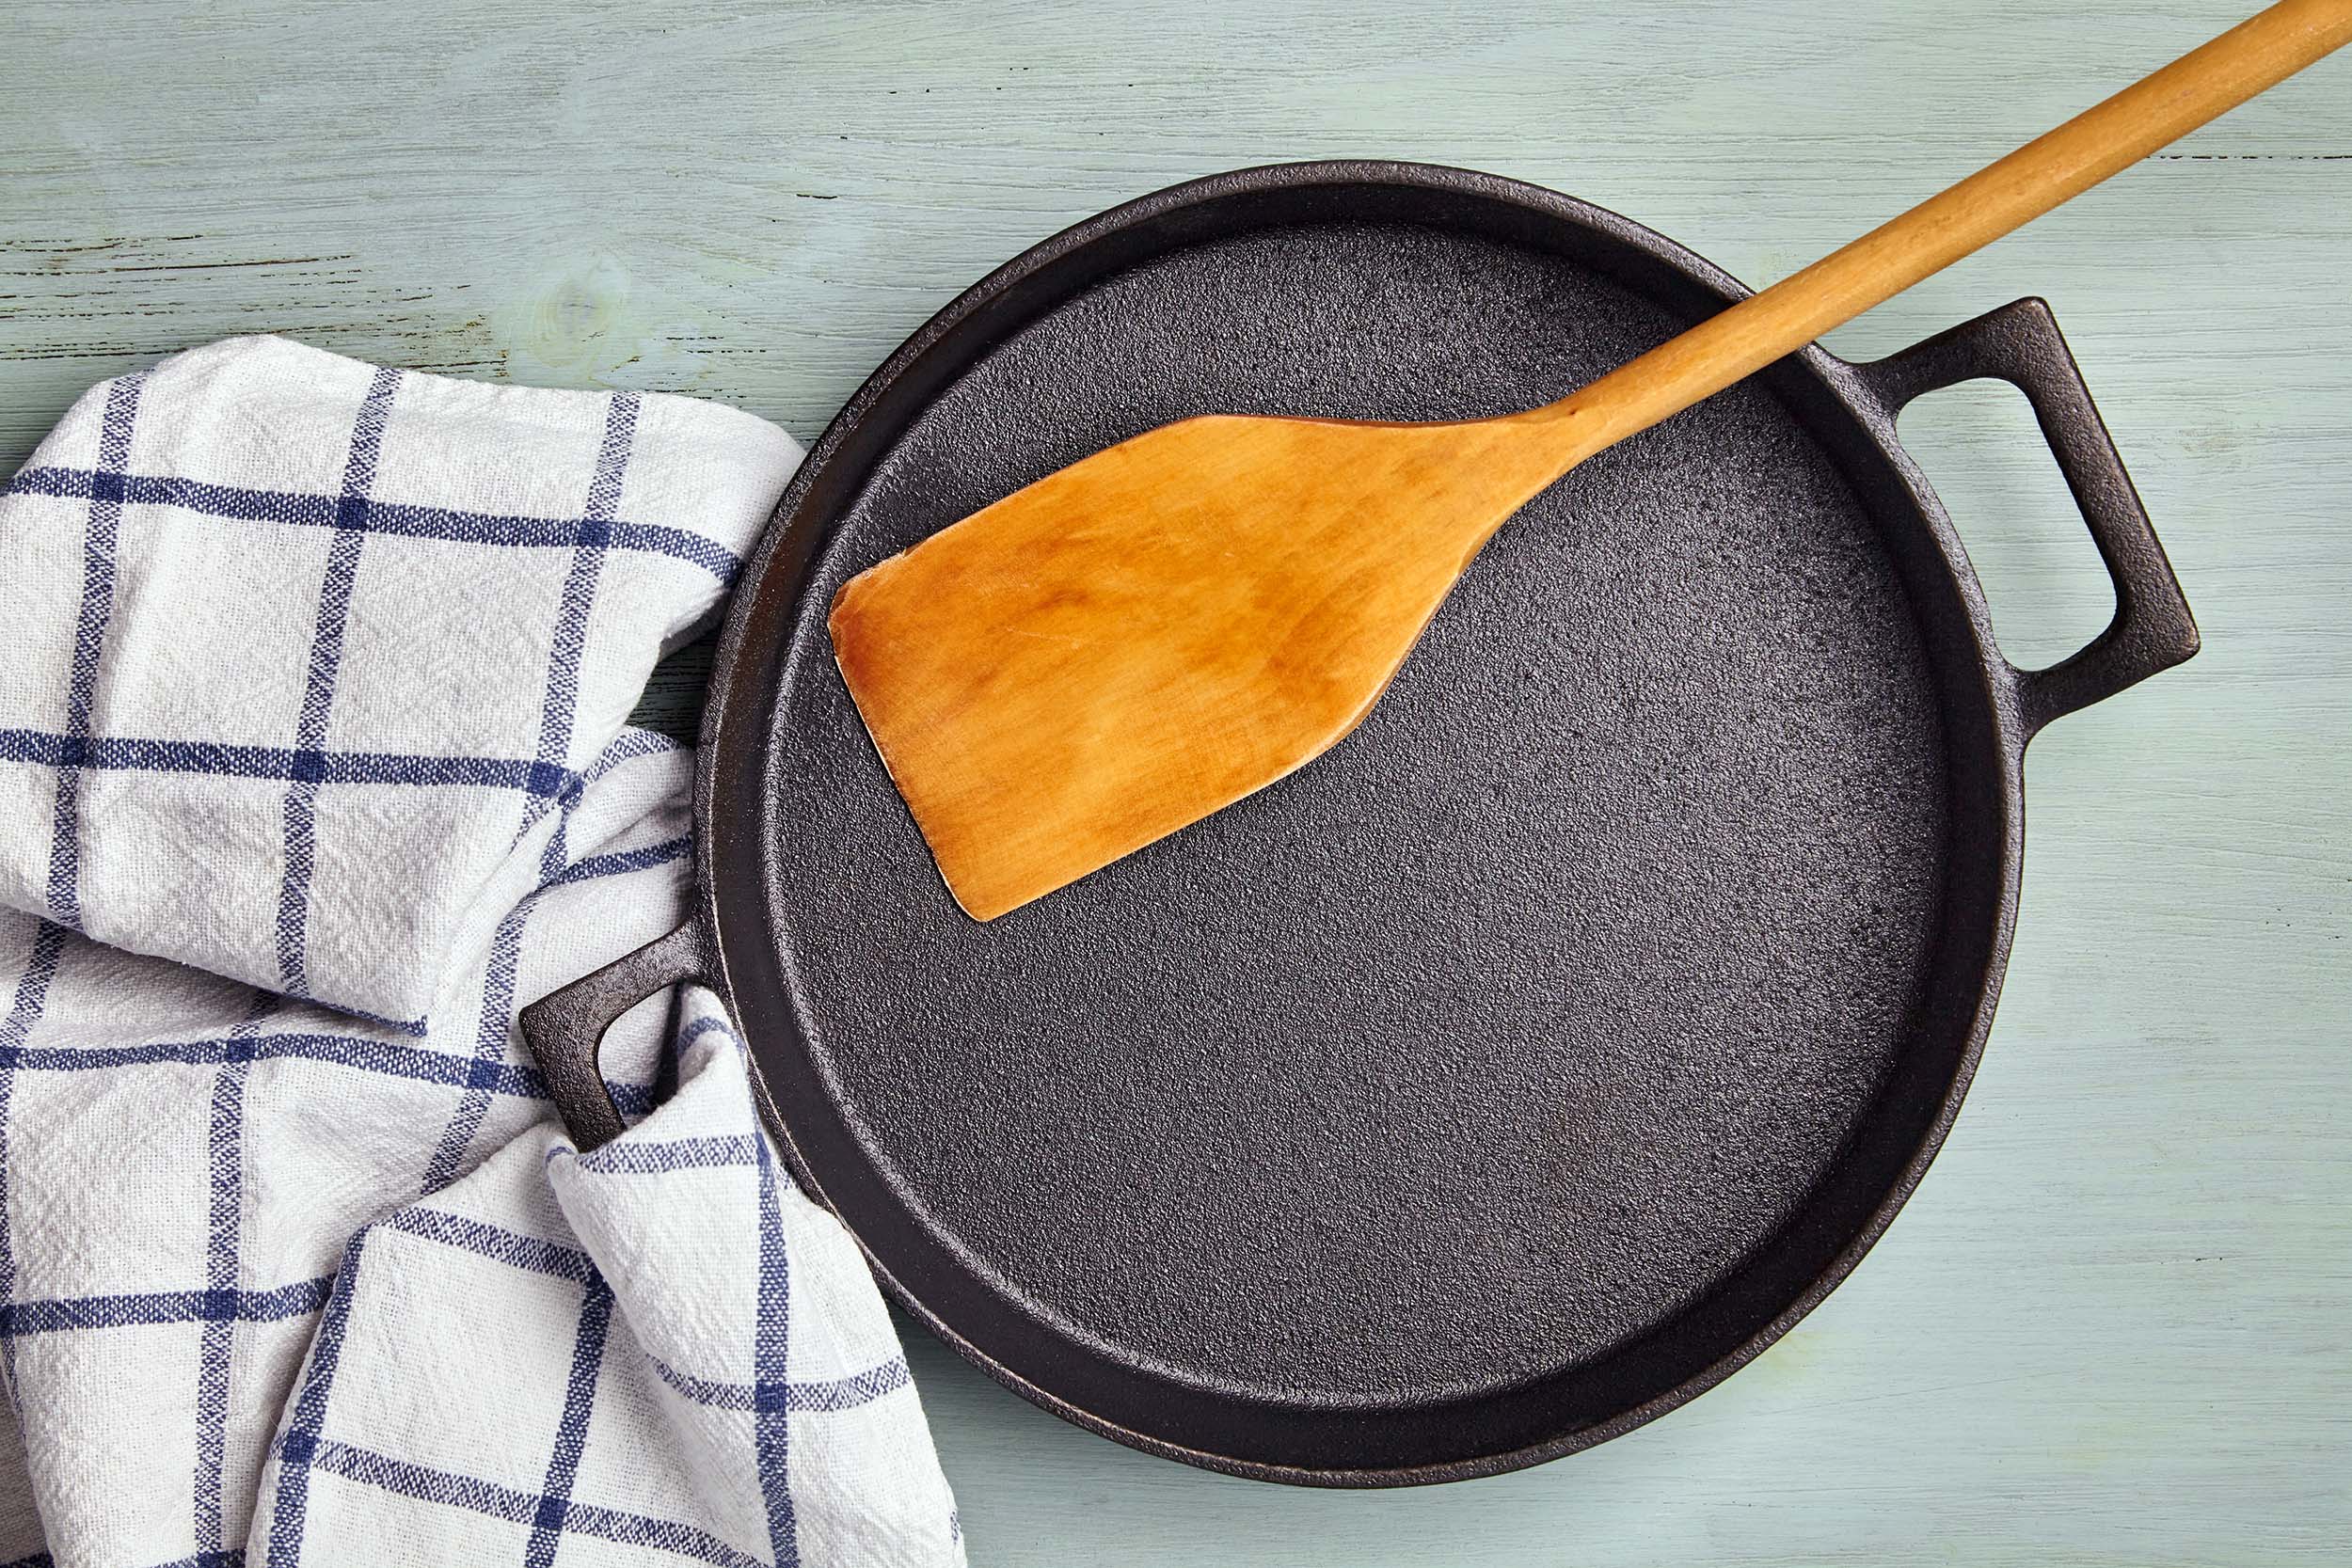 Wooden spatula on a new cast iron pan